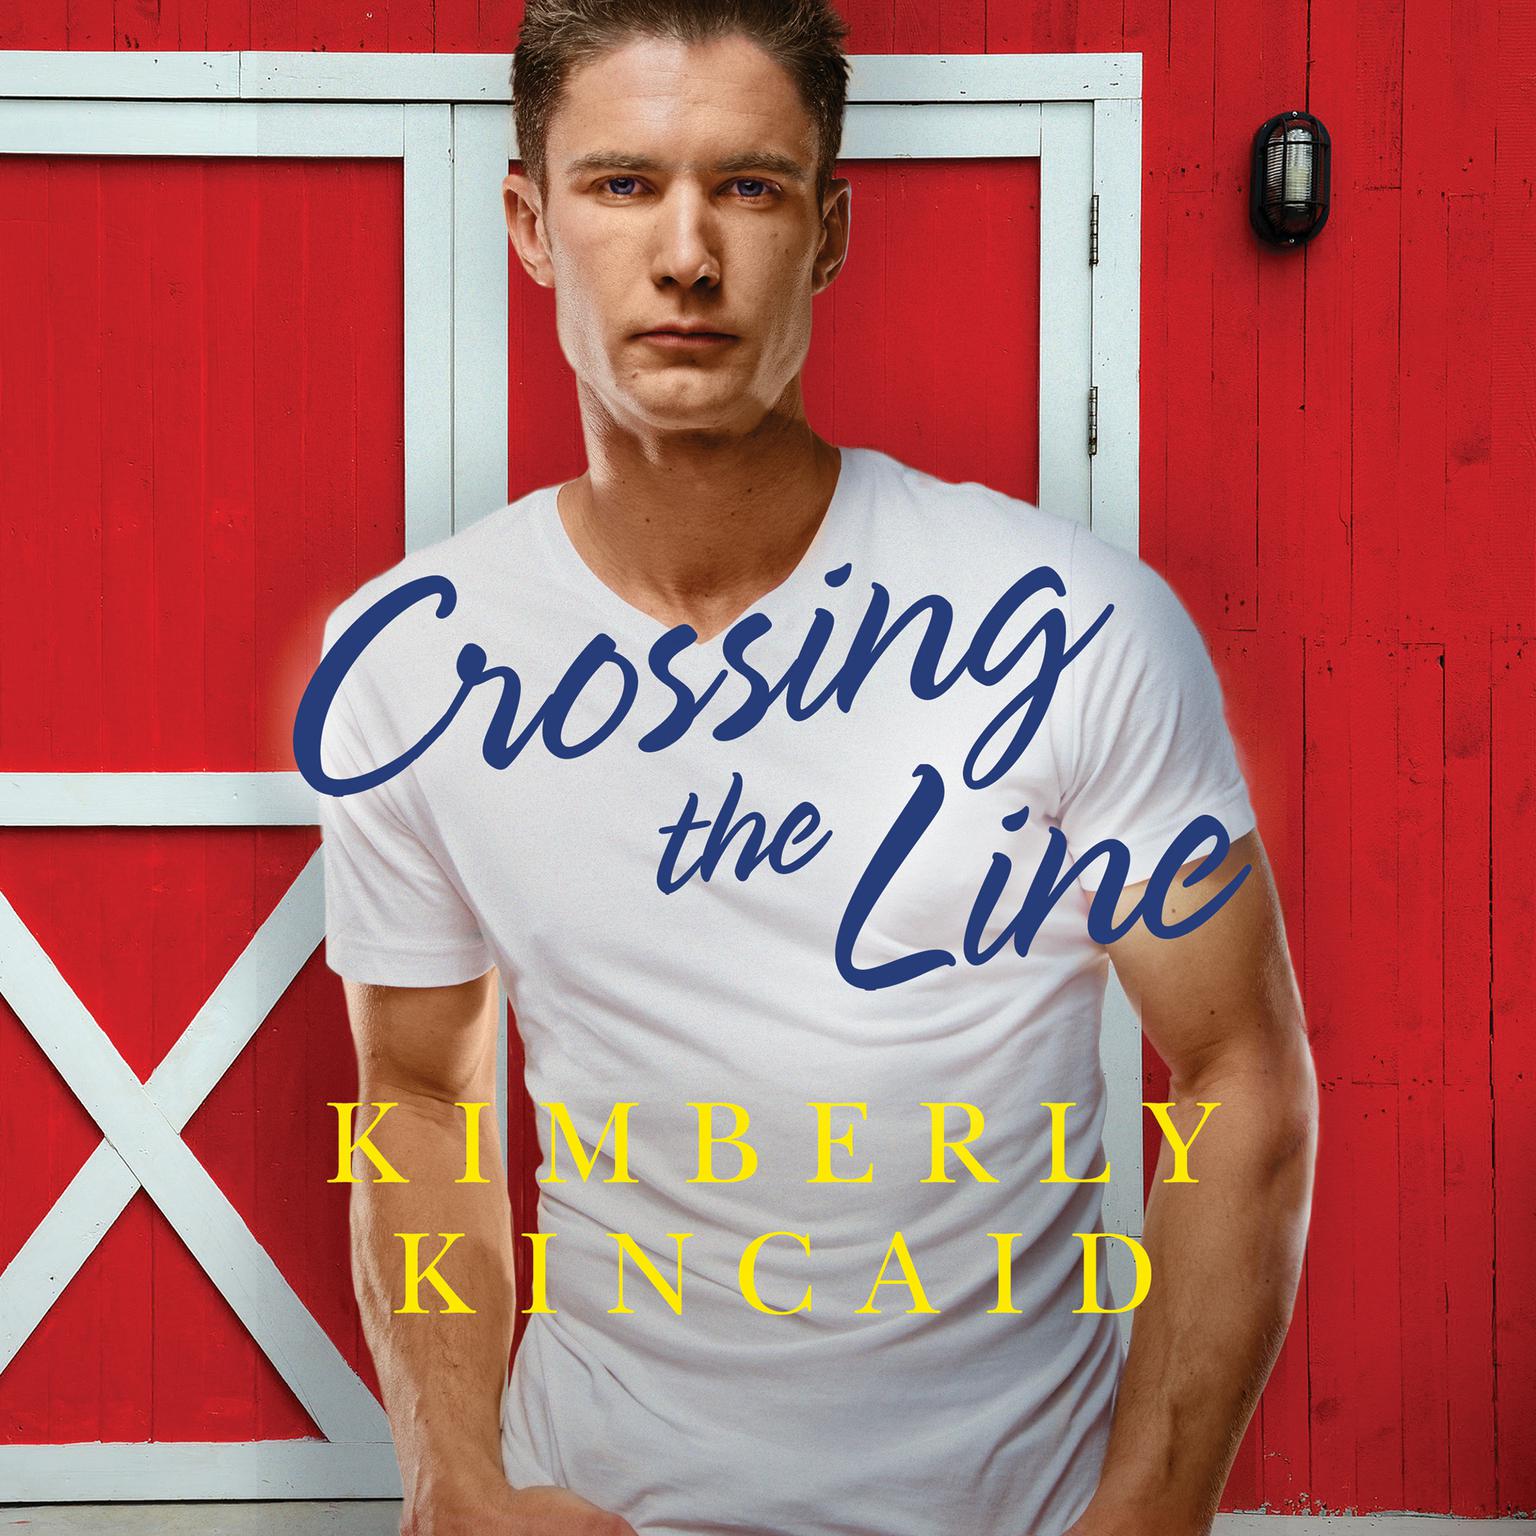 Crossing the Line Audiobook, by Kimberly Kincaid